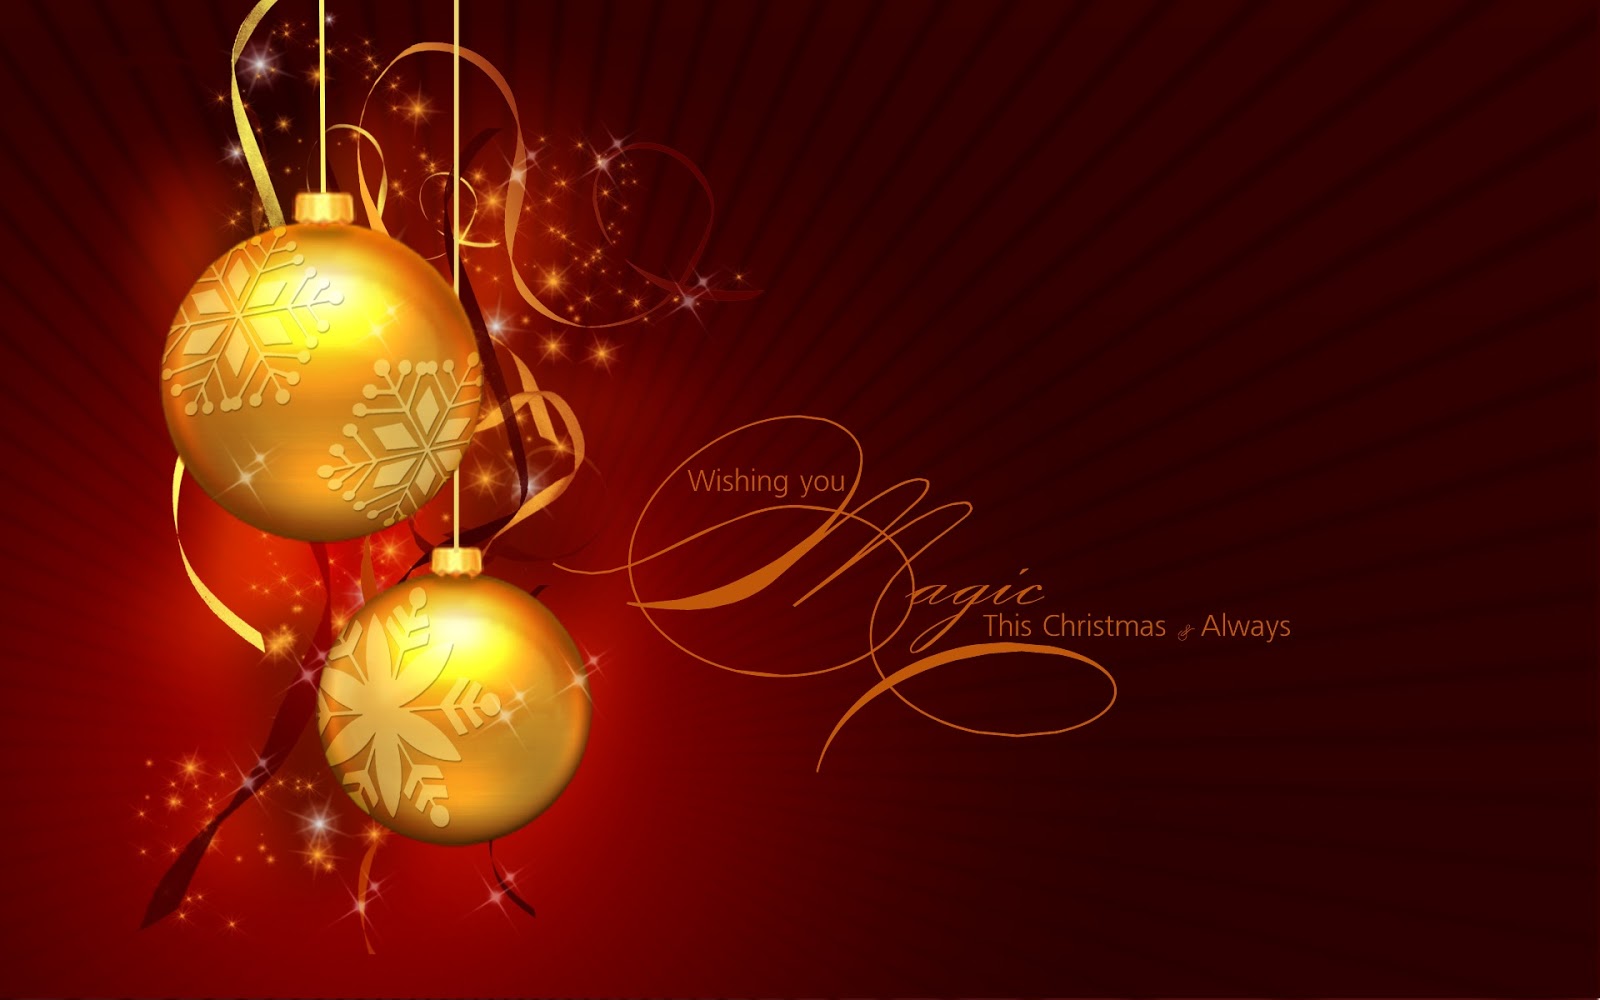 Best Greetings Happy Holiday Wallpaper And Greeting